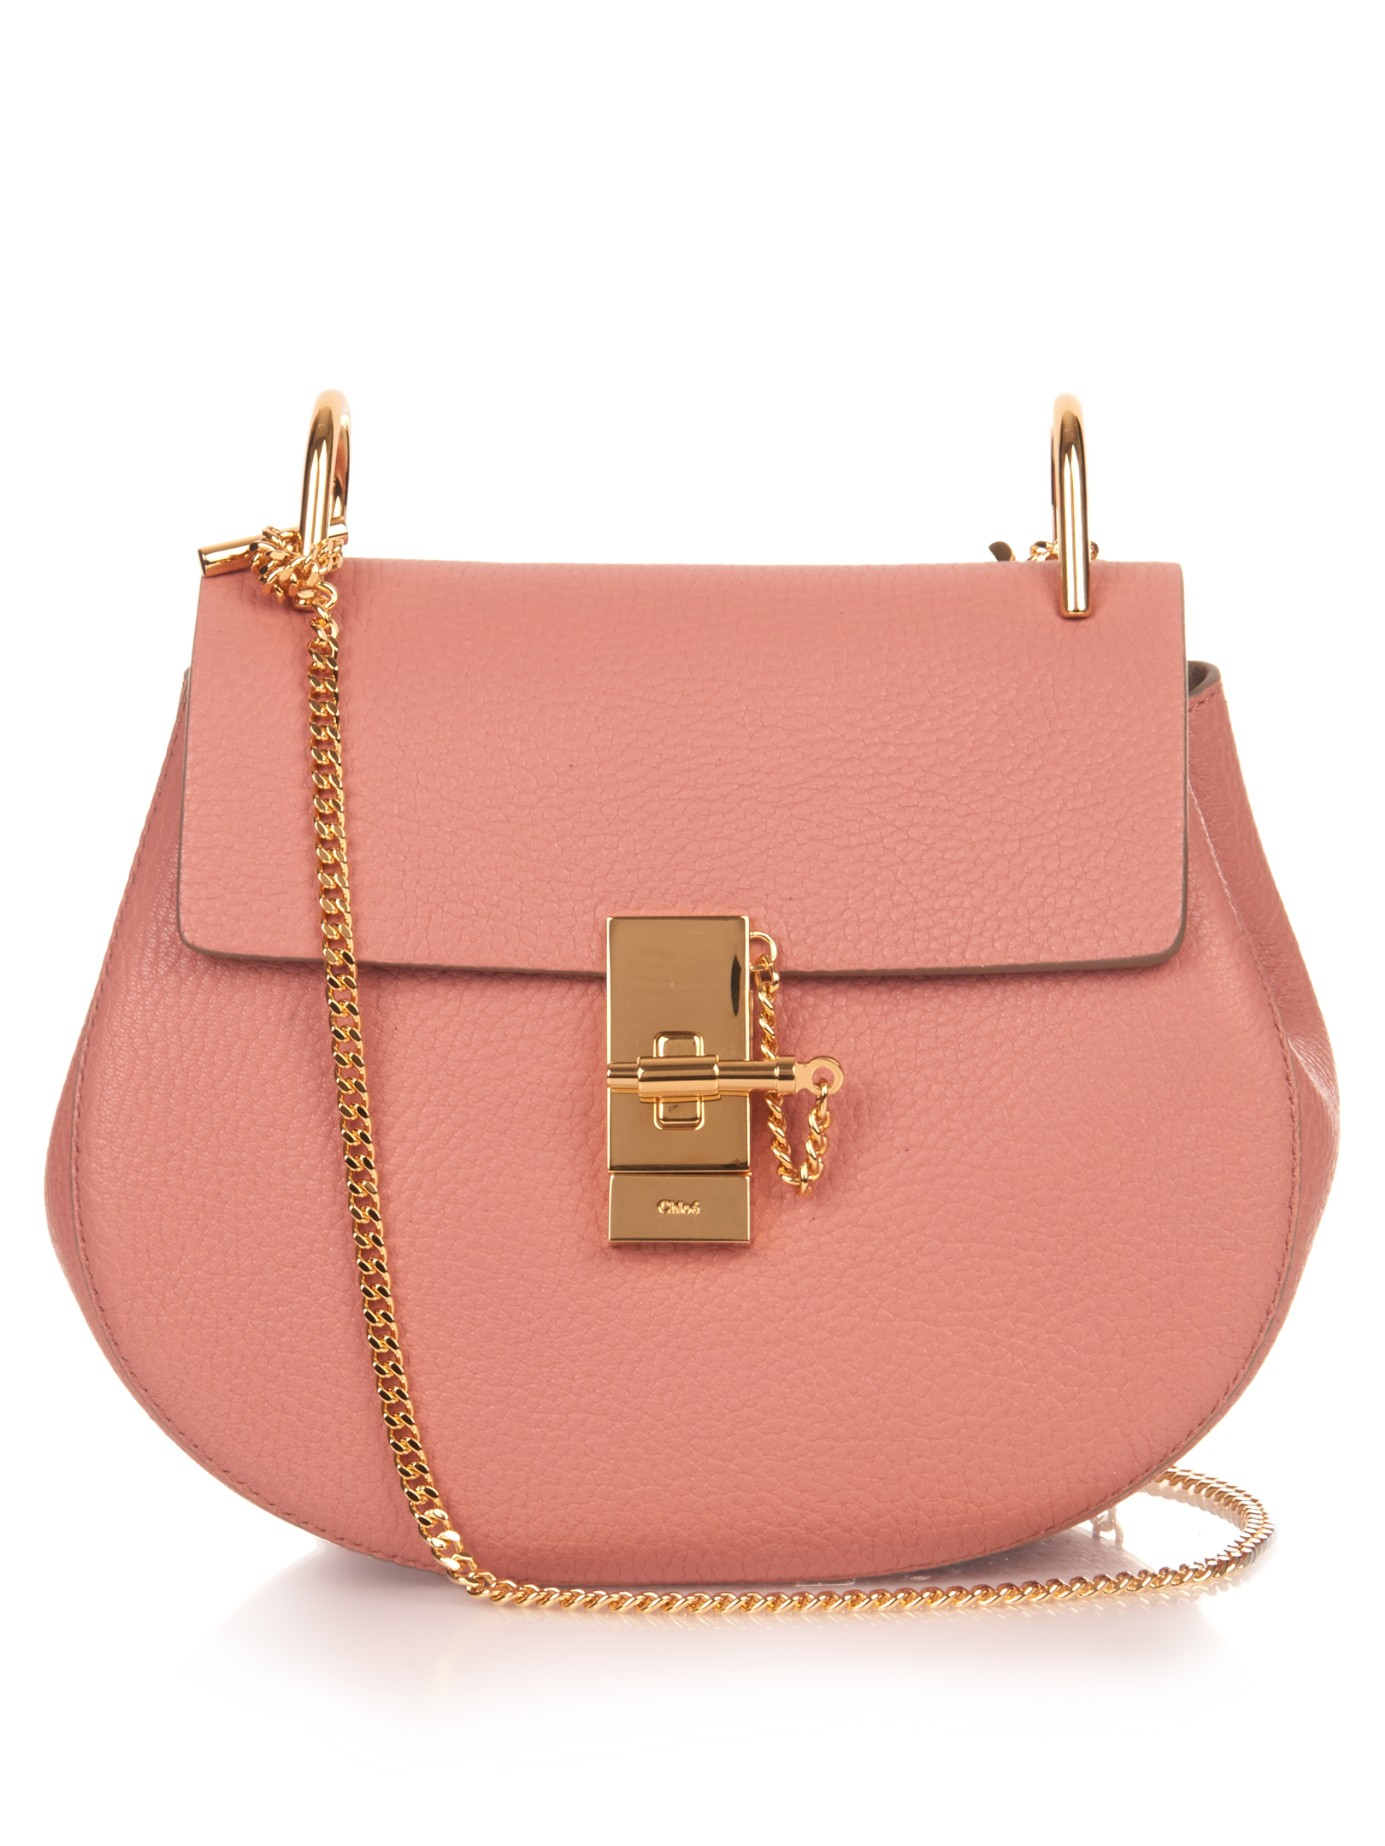 Lyst - Chloé Drew Small Leather Shoulder Bag in Pink